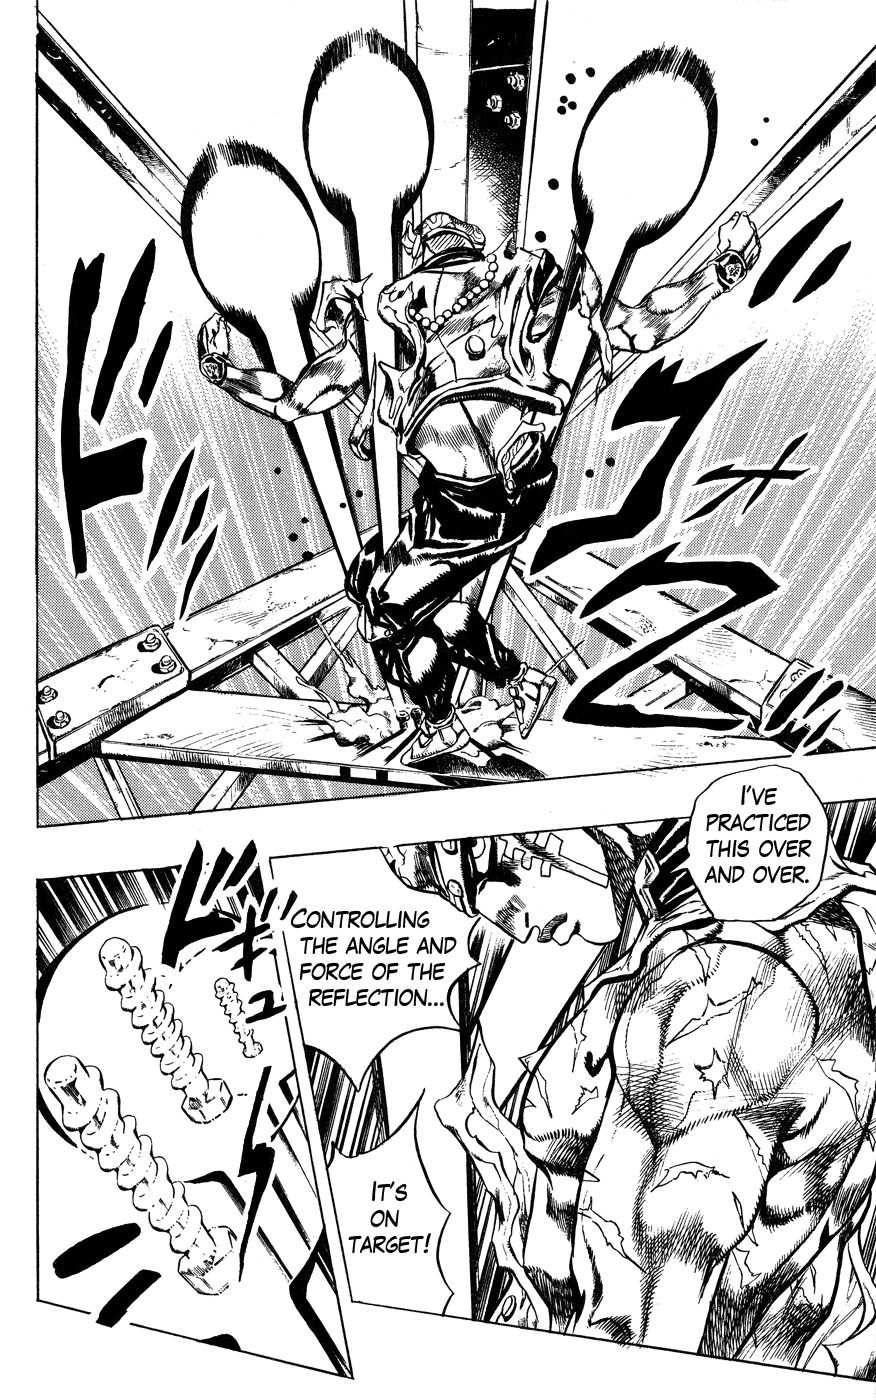 JoJo's Bizarre Adventure Part 4 Diamond is Unbreakable Vol. 15 Ch. 136 Who Wants to Live on a Transmission Tower? Part 4